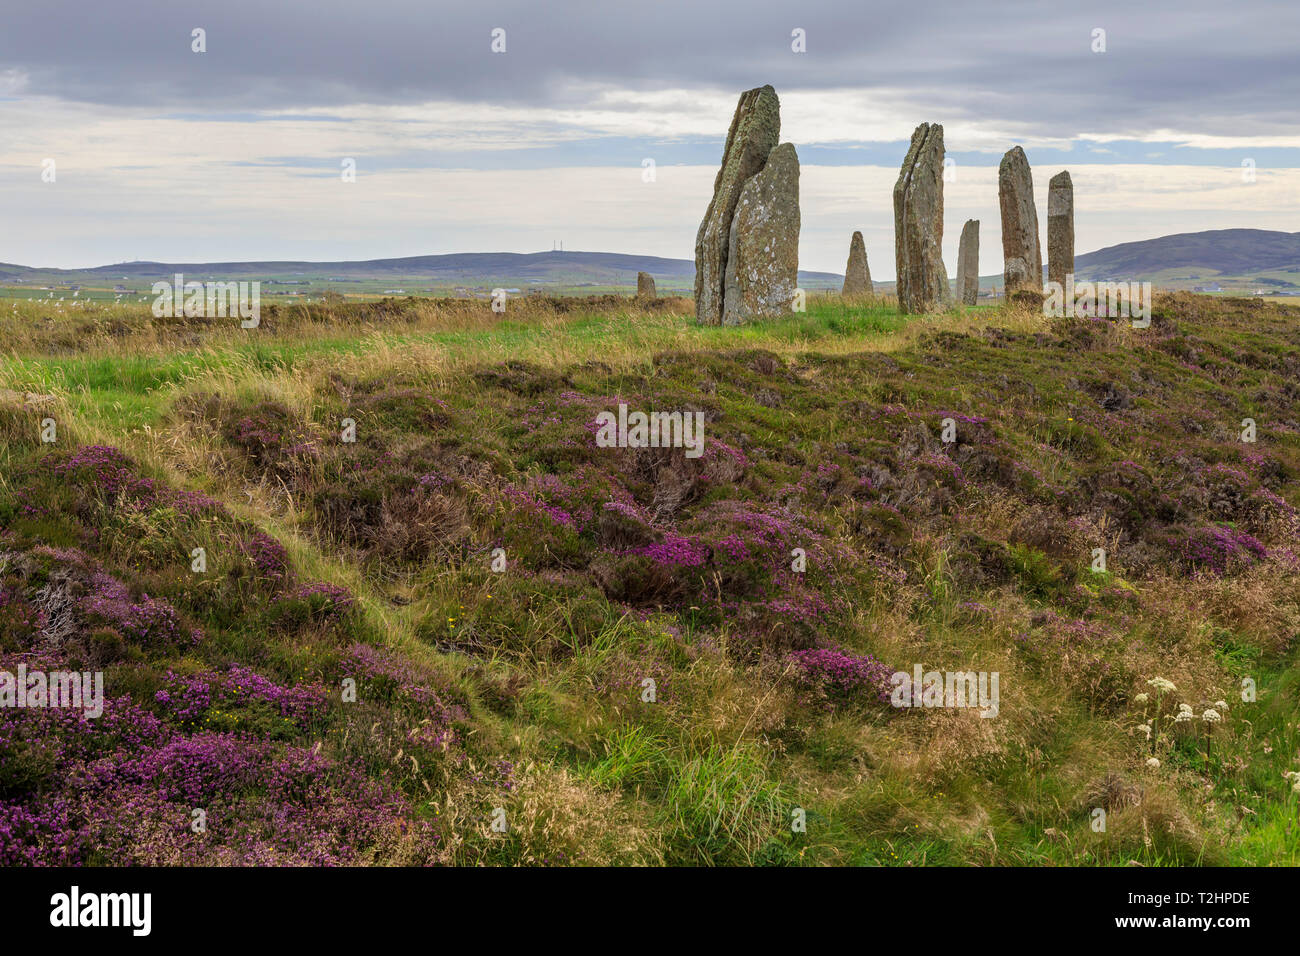 Ring of Brodgar stone circle in Orkney Islands, Scotland, Europe Stock Photo